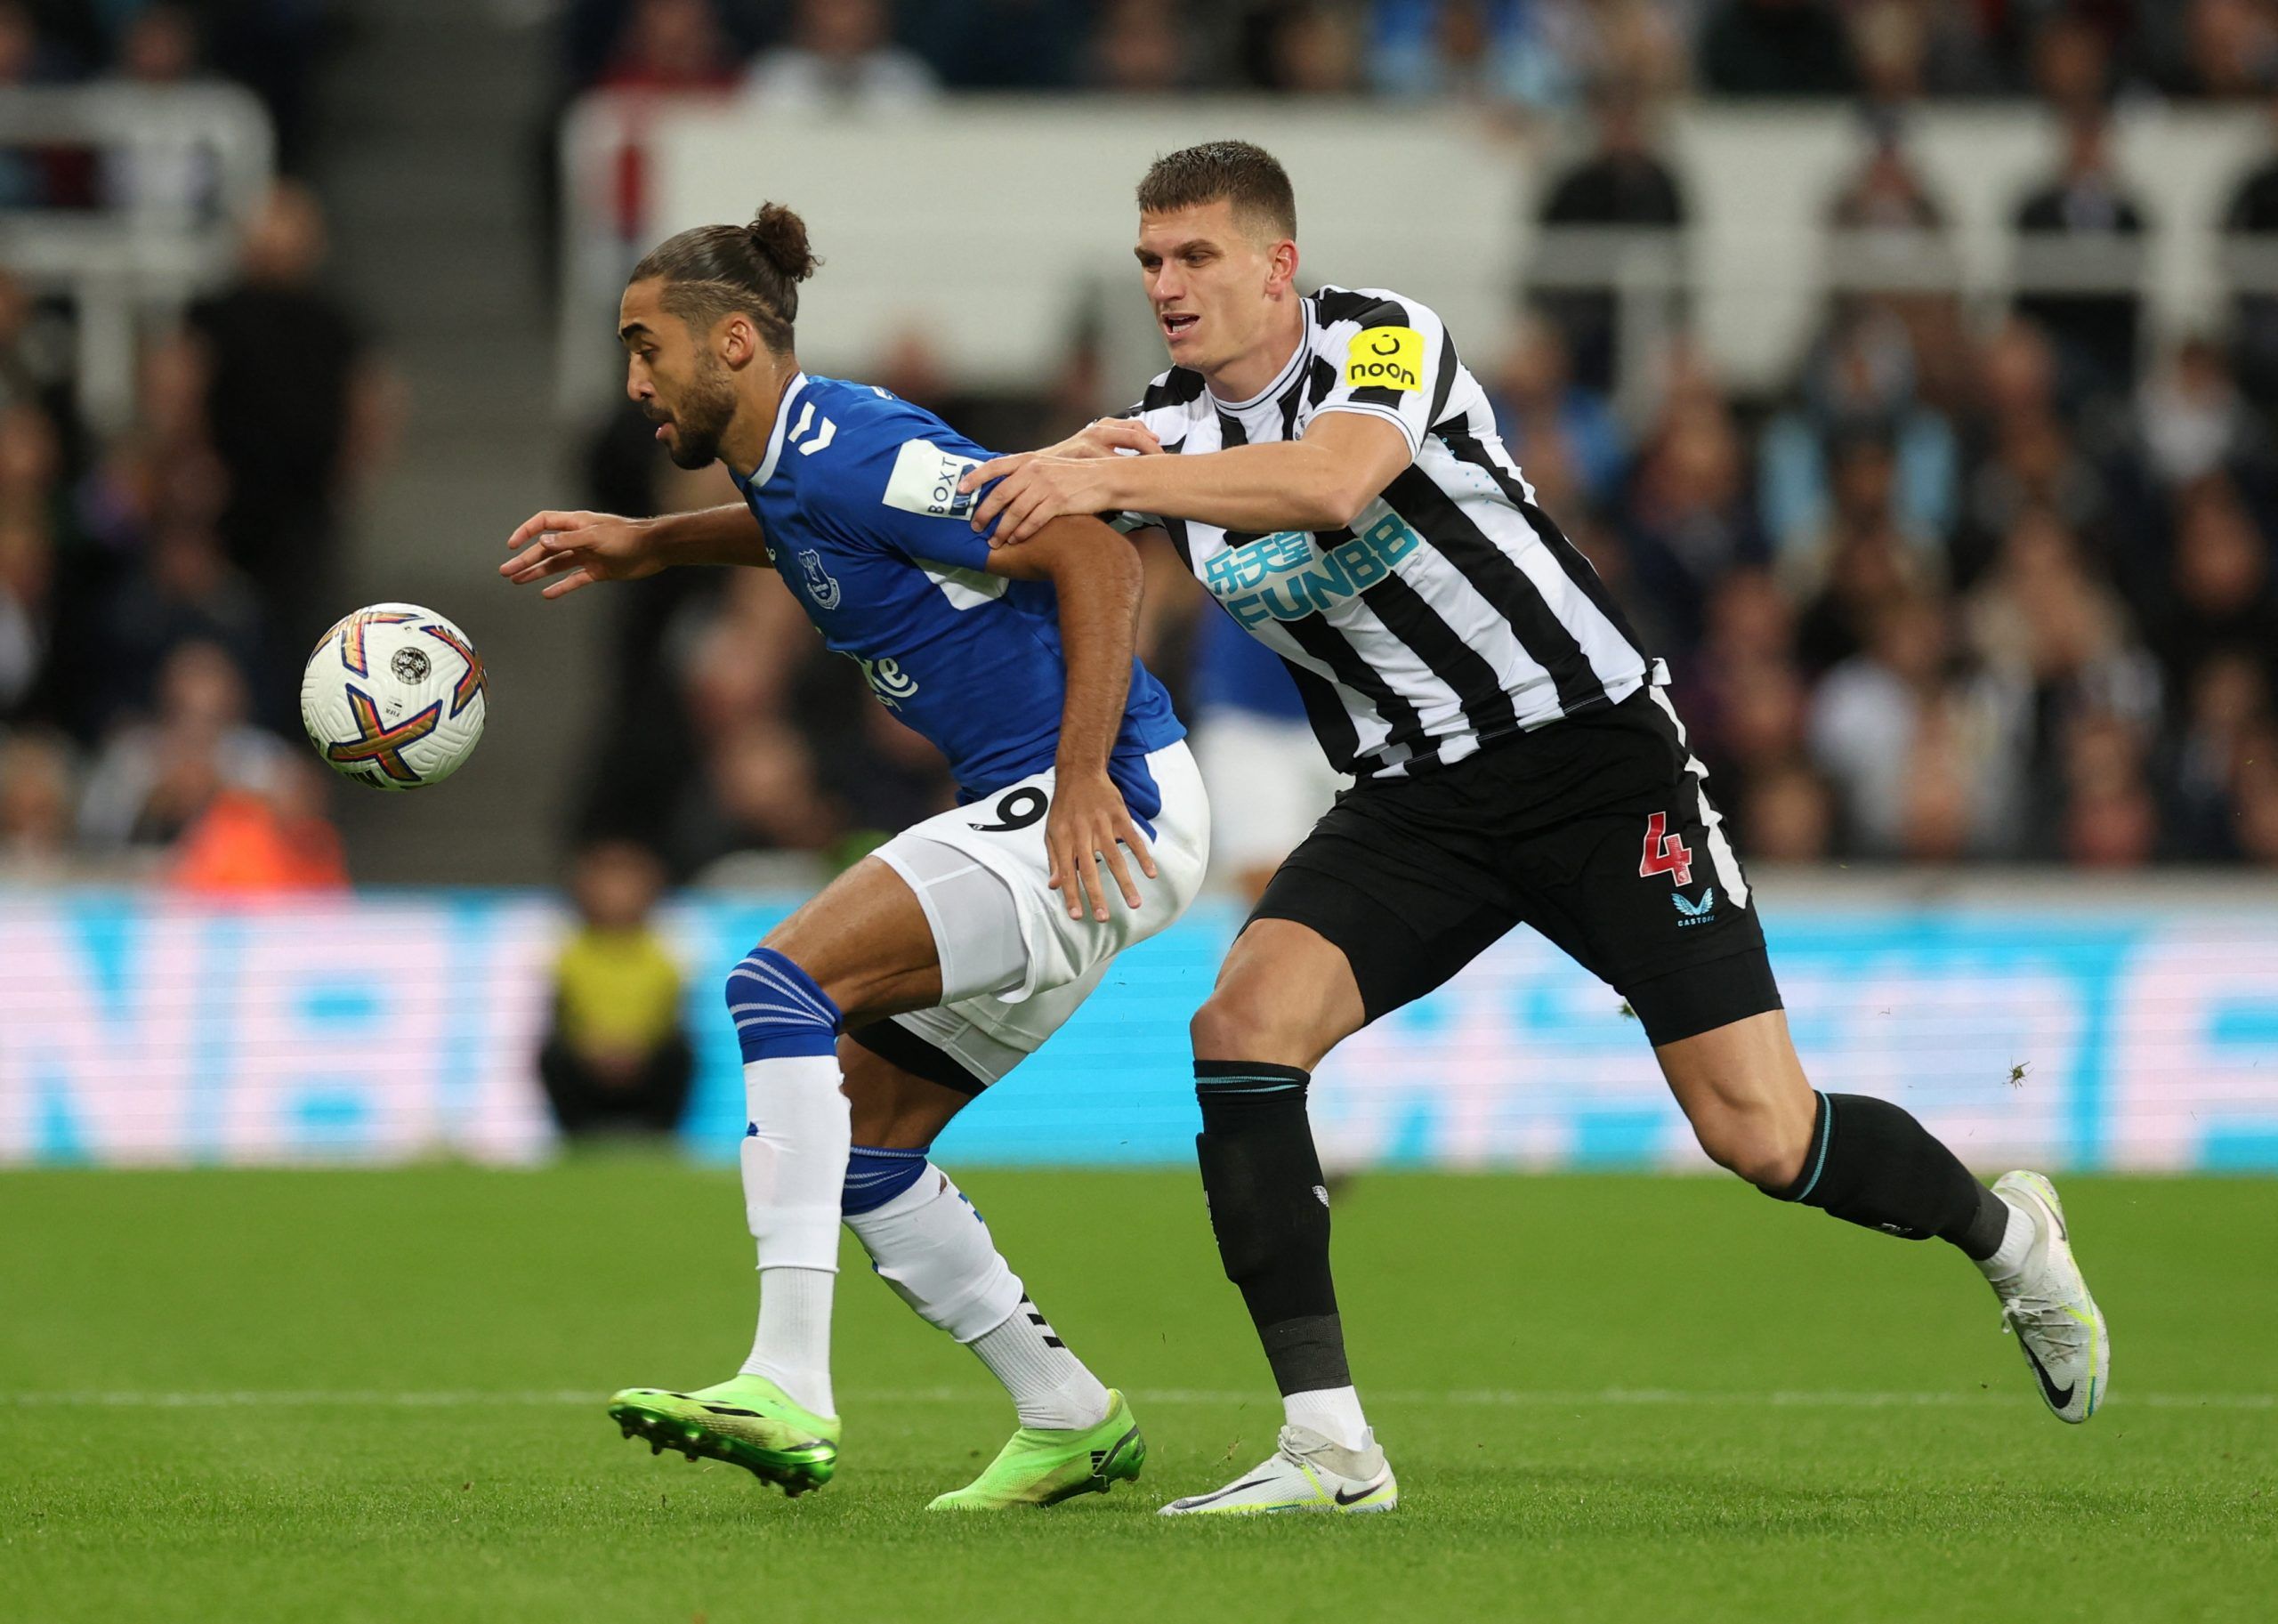 Soccer Football - Premier League - Newcastle United v Everton - St James' Park, Newcastle, Britain - October 19, 2022 Everton's Dominic Calvert-Lewin in action with Newcastle United's Sven Botman Action Images via Reuters/Lee Smith EDITORIAL USE ONLY. No use with unauthorized audio, video, data, fixture lists, club/league logos or 'live' services. Online in-match use limited to 75 images, no video emulation. No use in betting, games or single club /league/player publications.  Please contact you